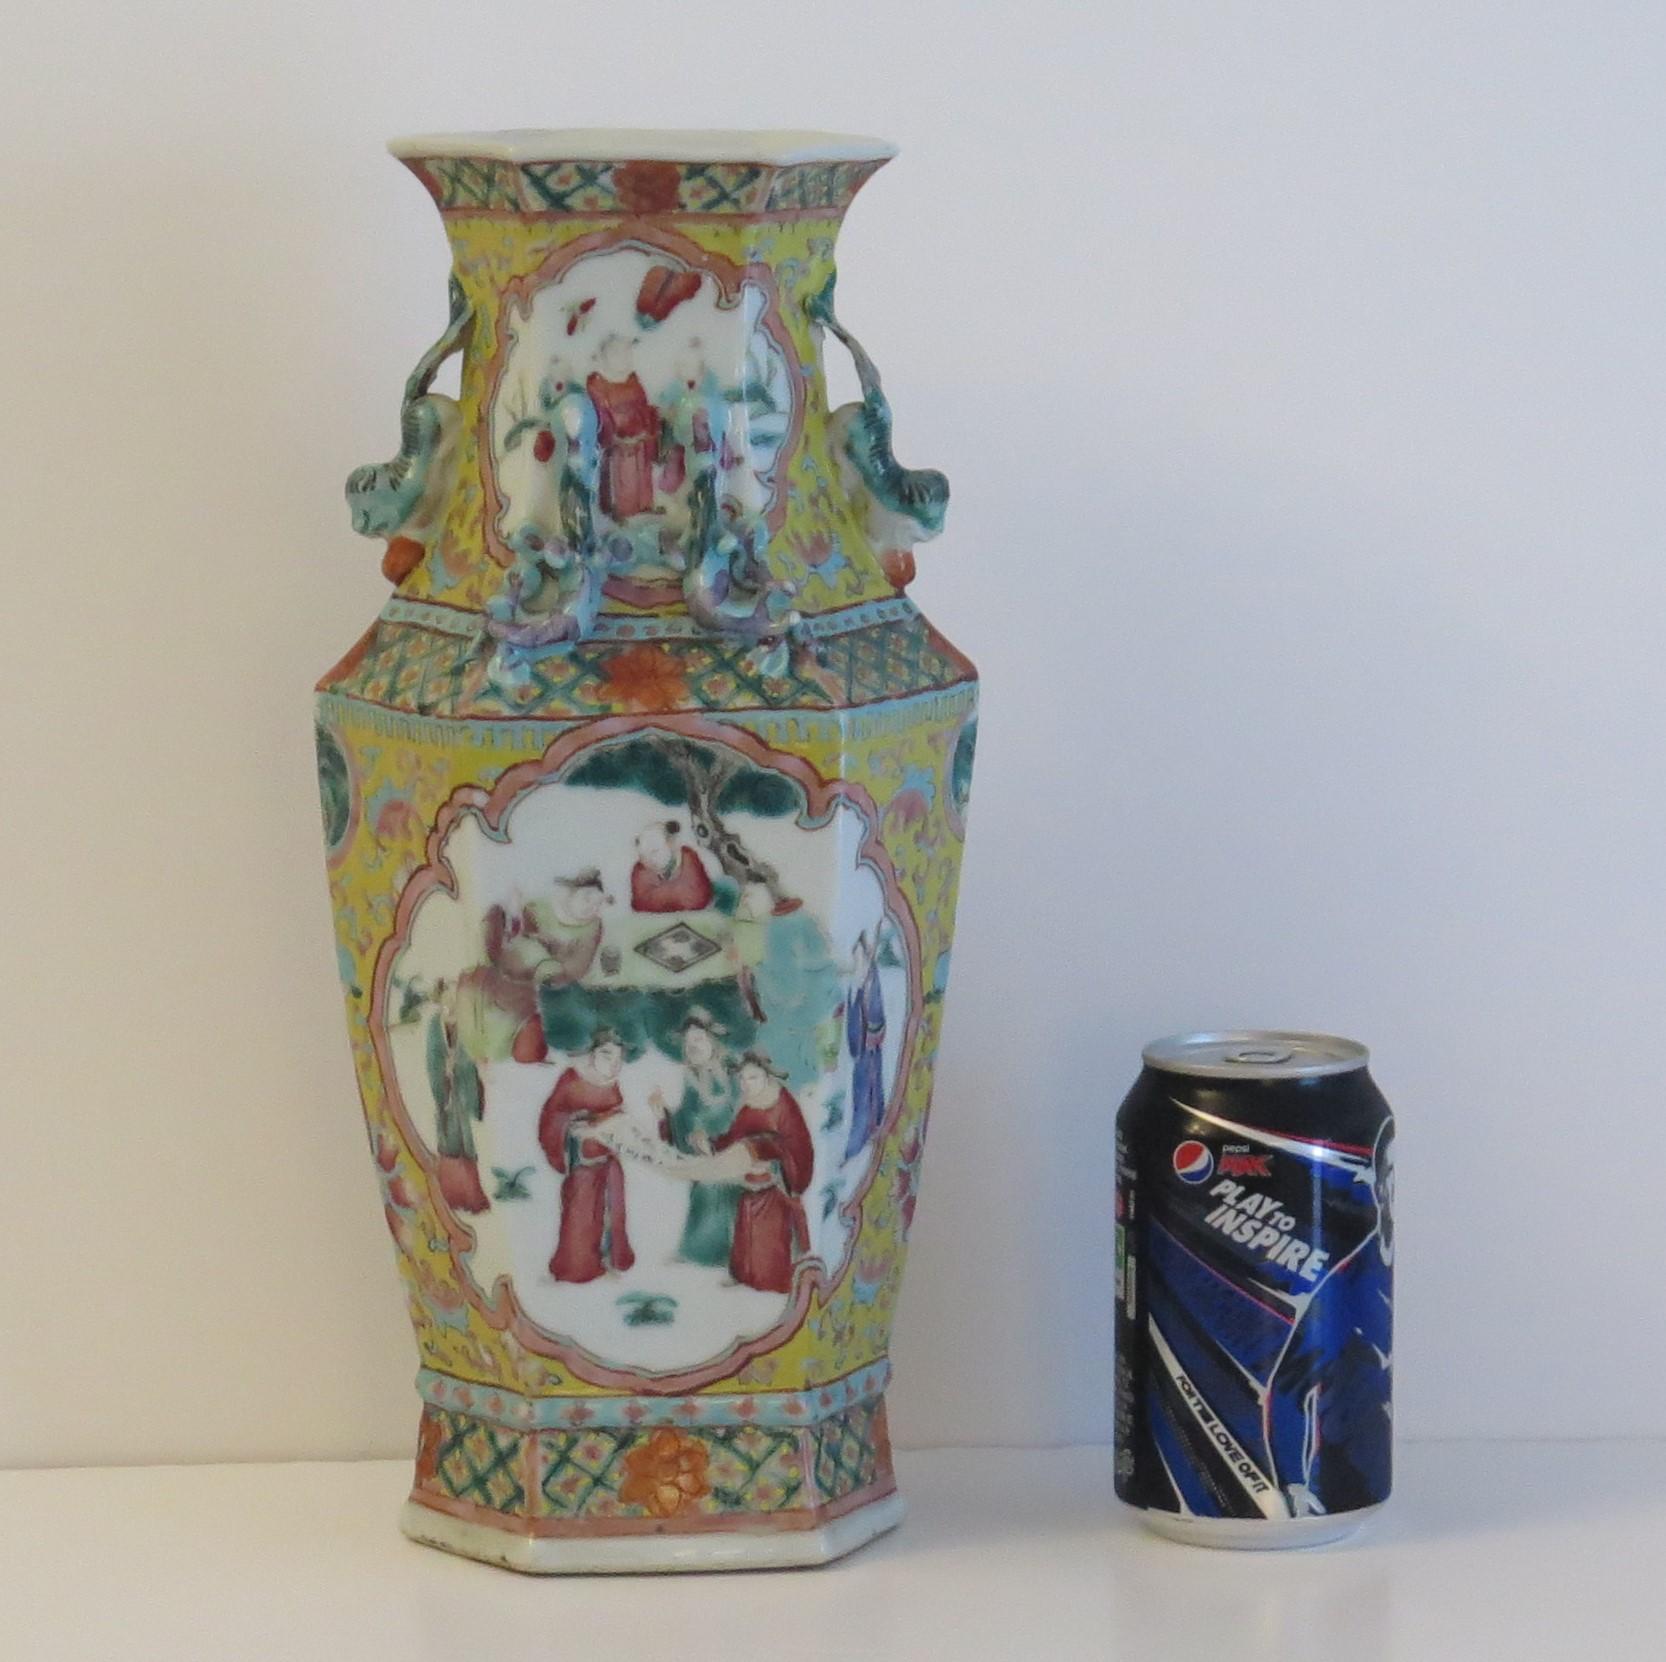 Chinese Export Vase Famille Rose Porcelain, Late Qing or Early Republic Period 14